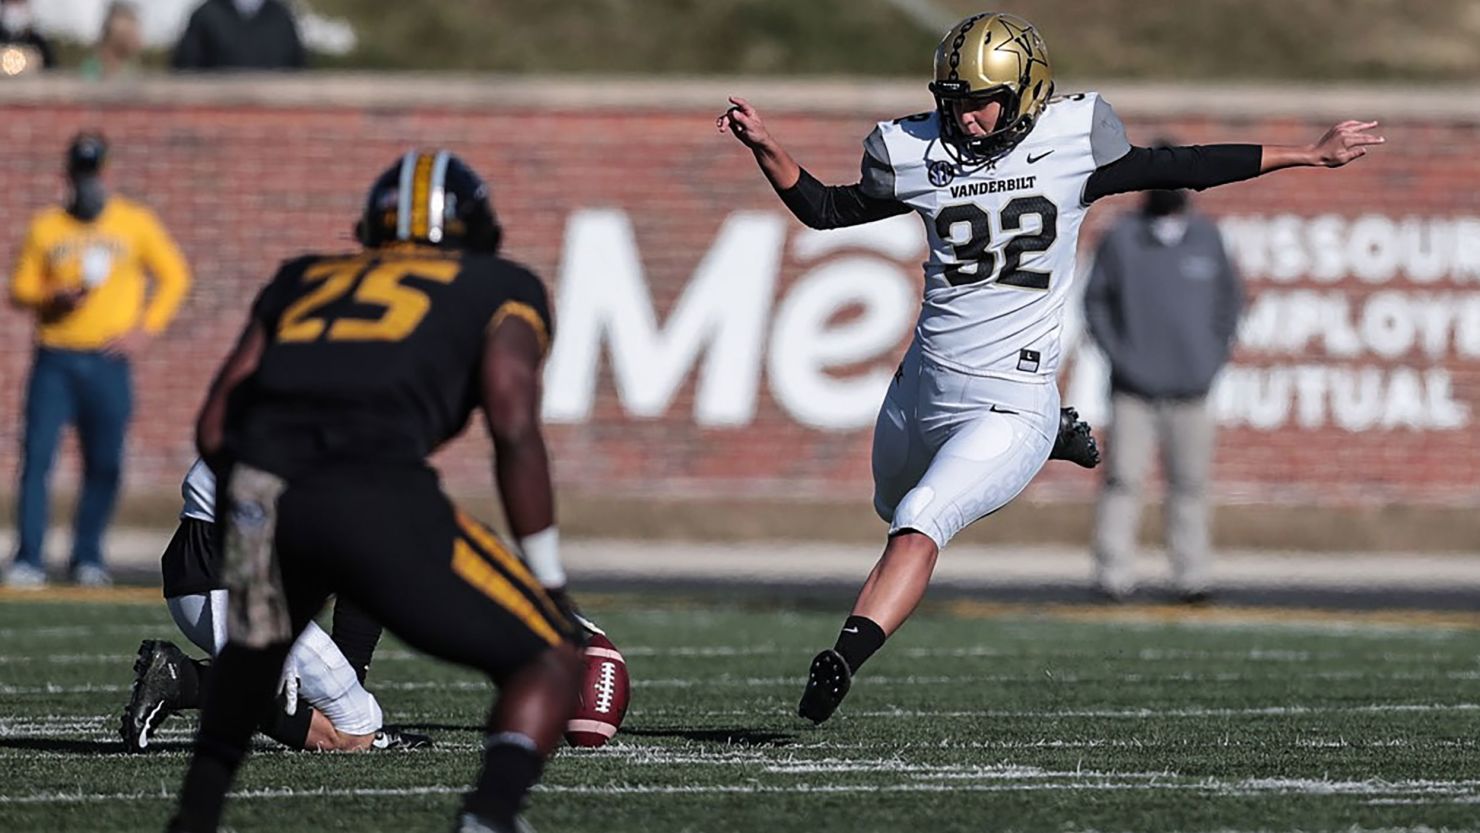 Sarah Fuller, #32 of the Vanderbilt Commodores, makes history on Saturday with second-half kickoff against the Mizzou Tigers at Memorial Stadium in Columbia, Missouri. 